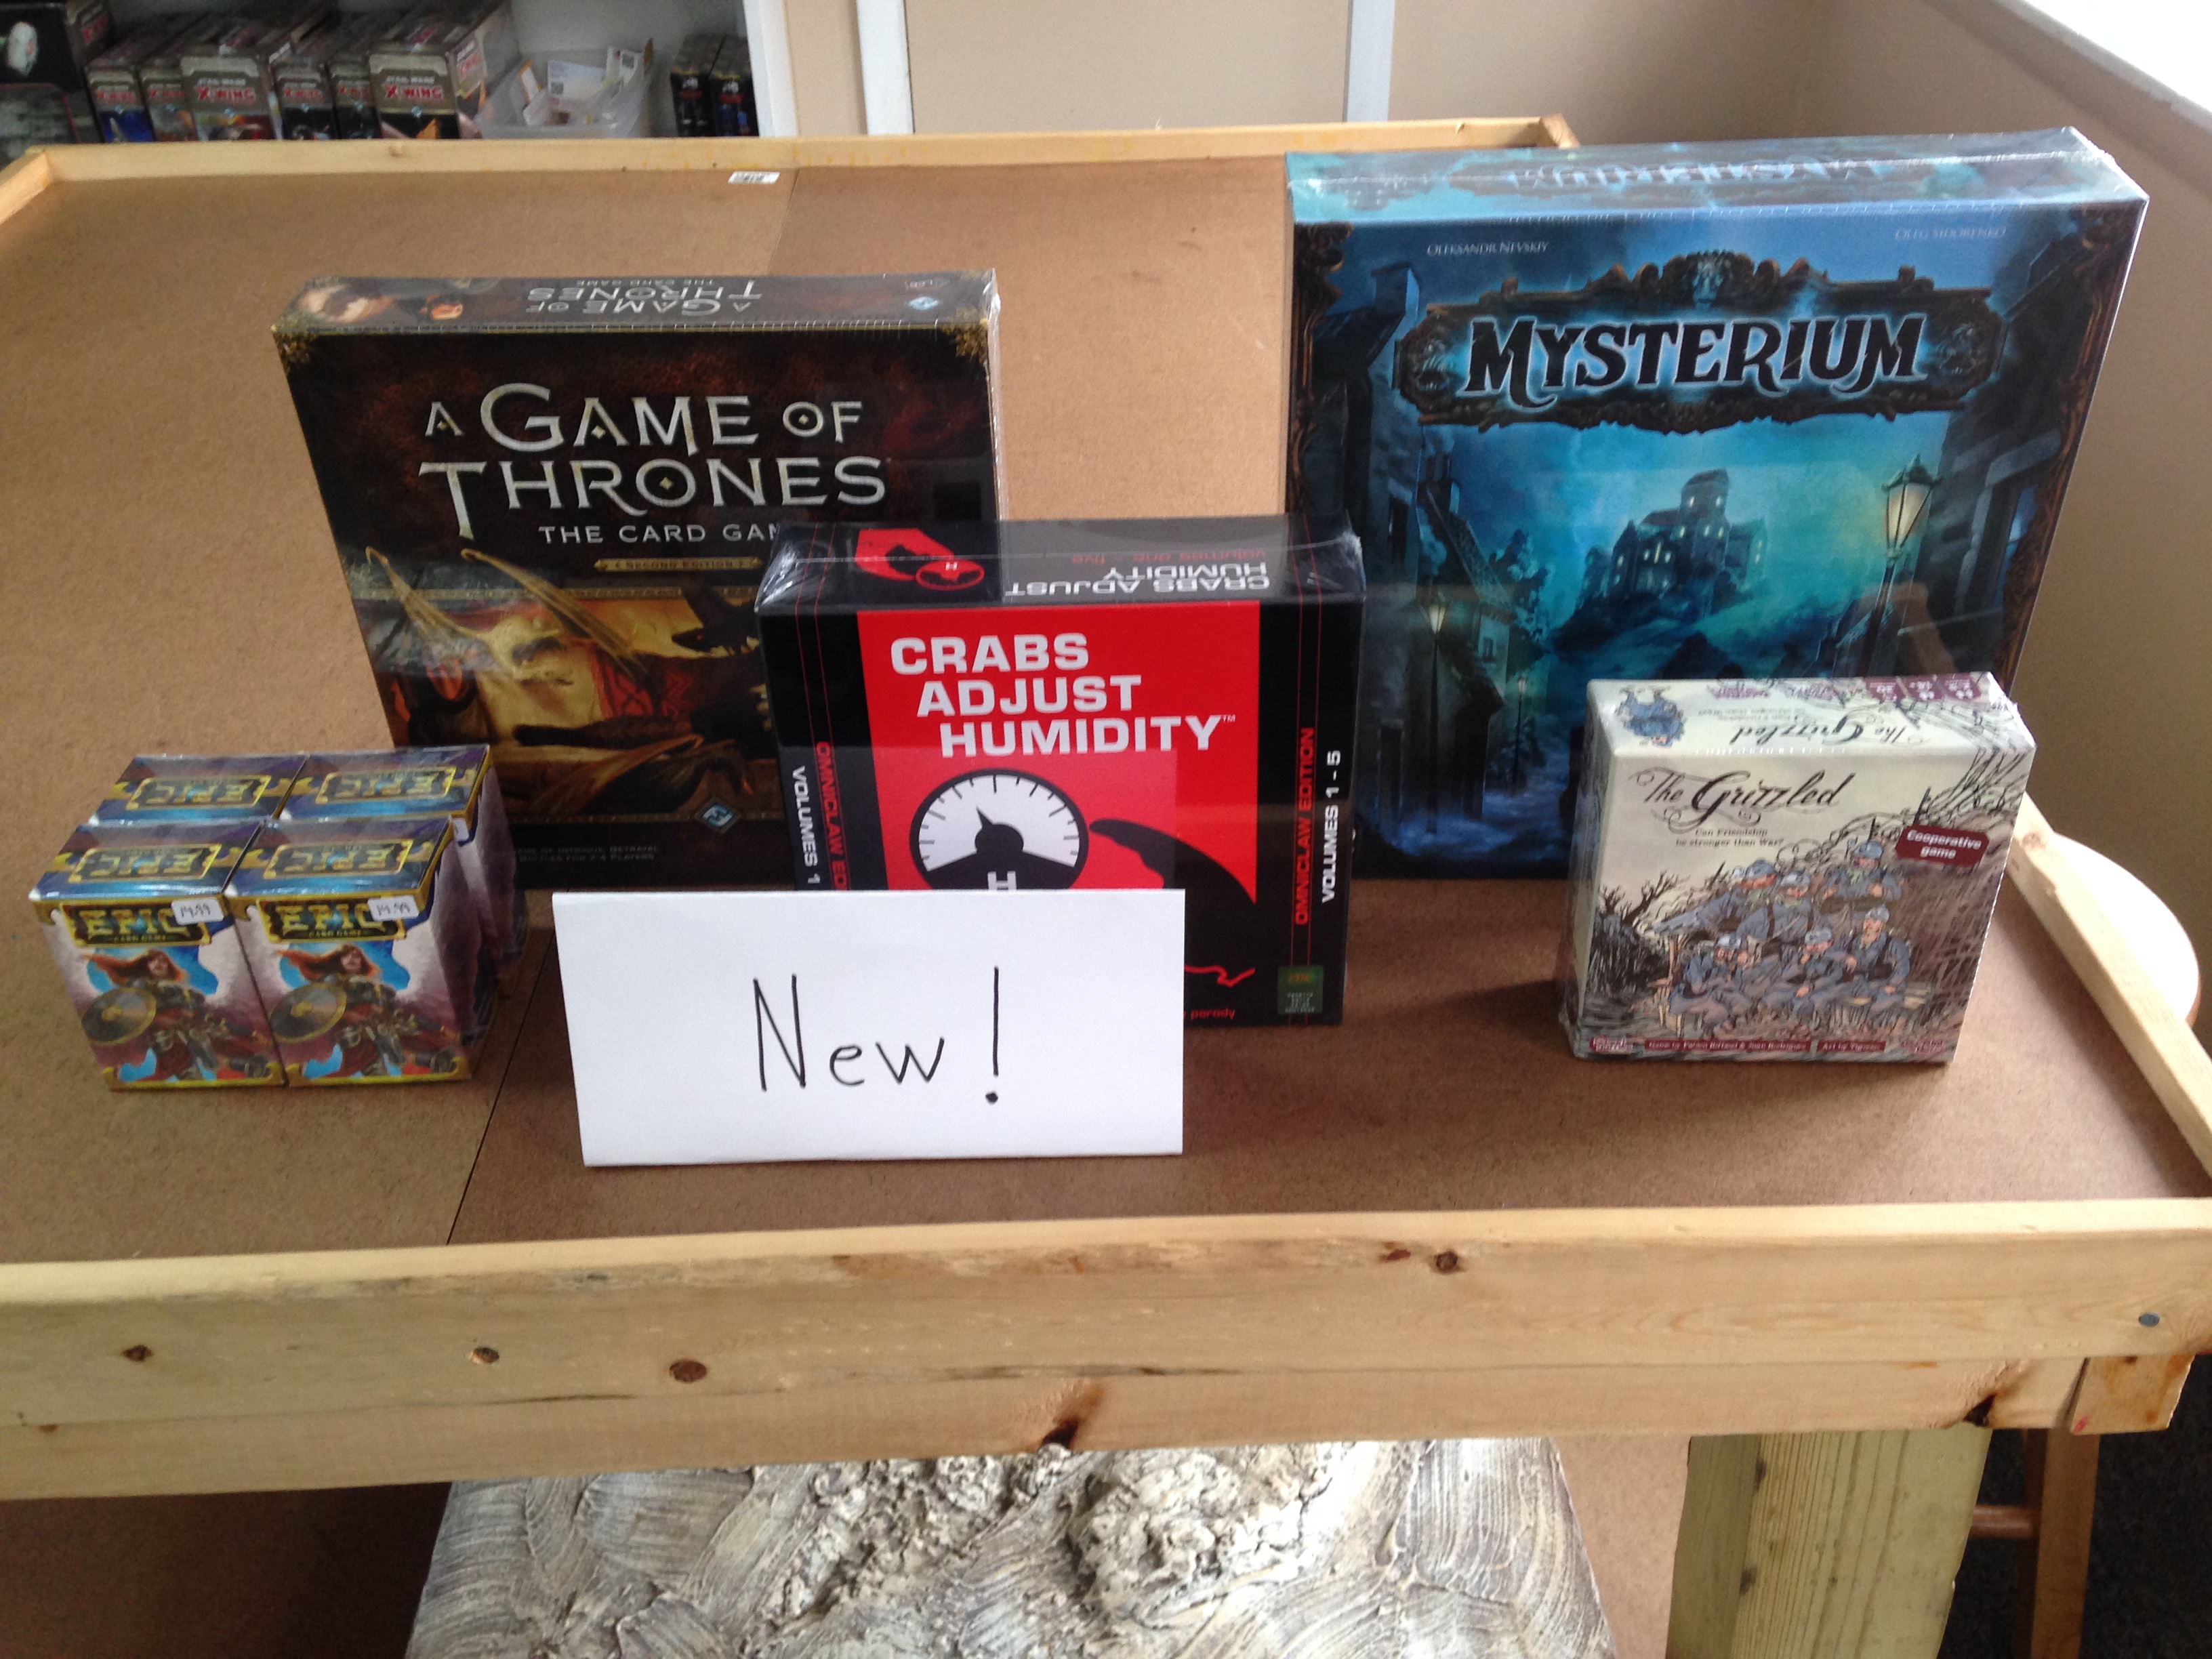 New in the Store! (10/14/15) Game of Thrones, Mysterium, The Grizzled, Epic Card Game, and Crabs Adjust Humidity